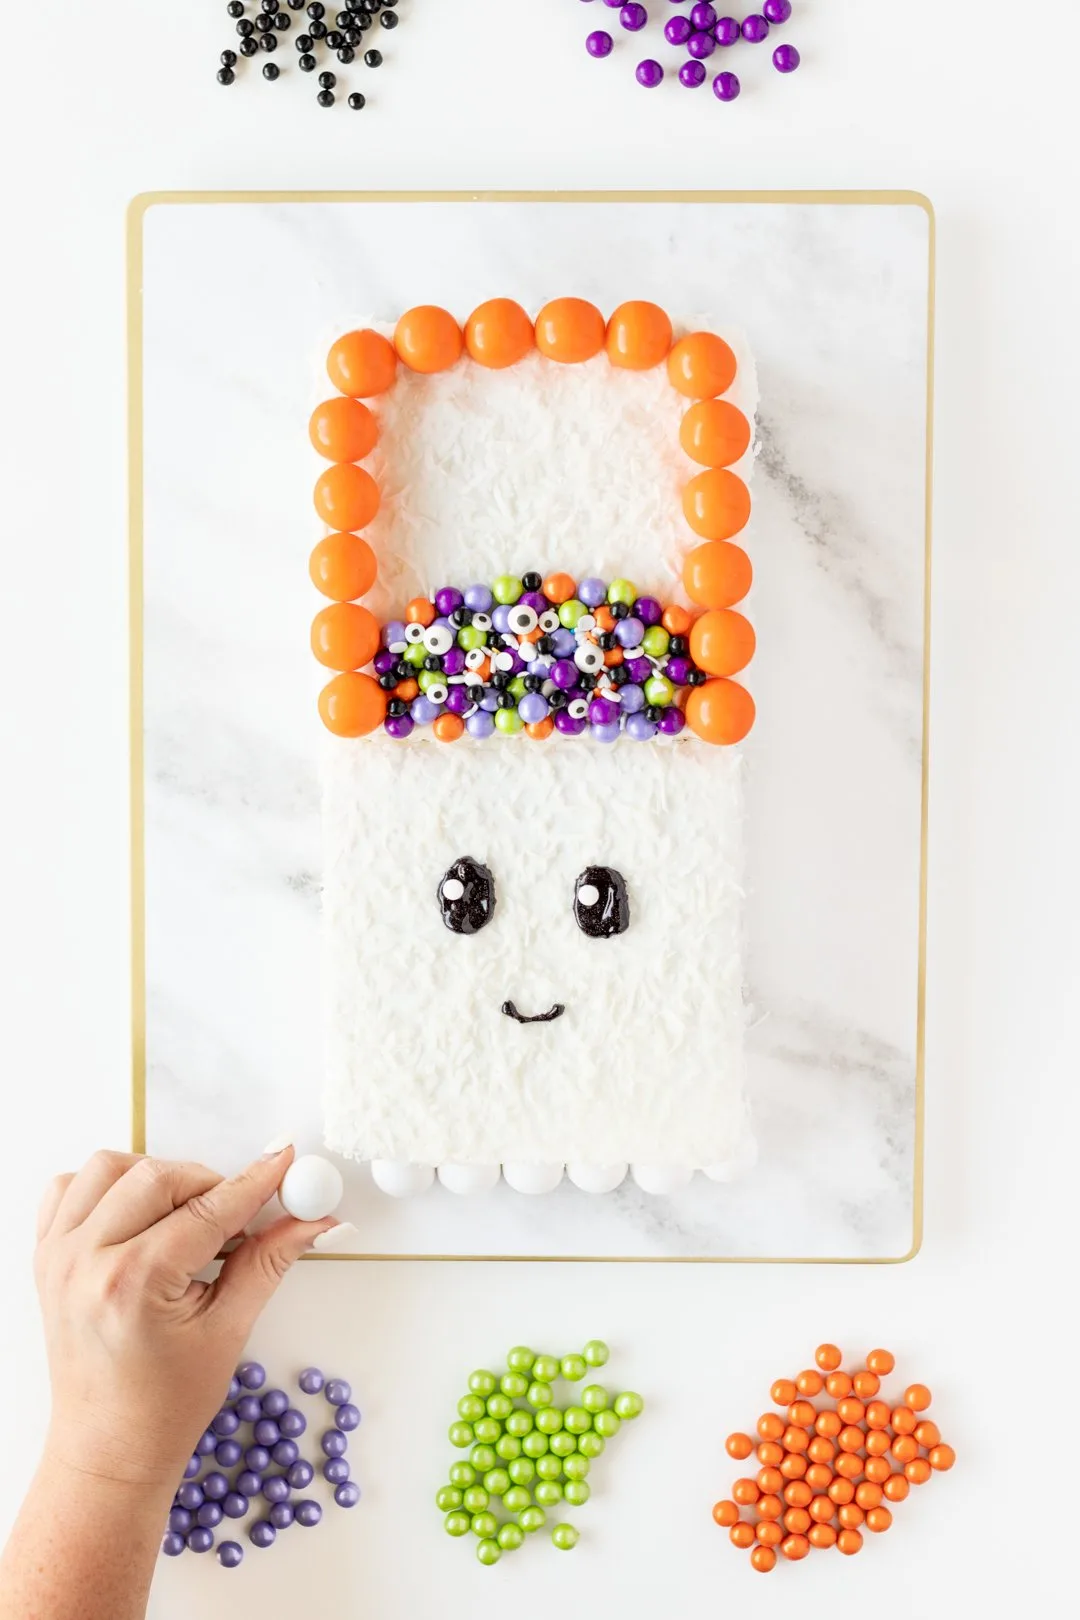 Adding gumballs to decorate a Halloween cake.